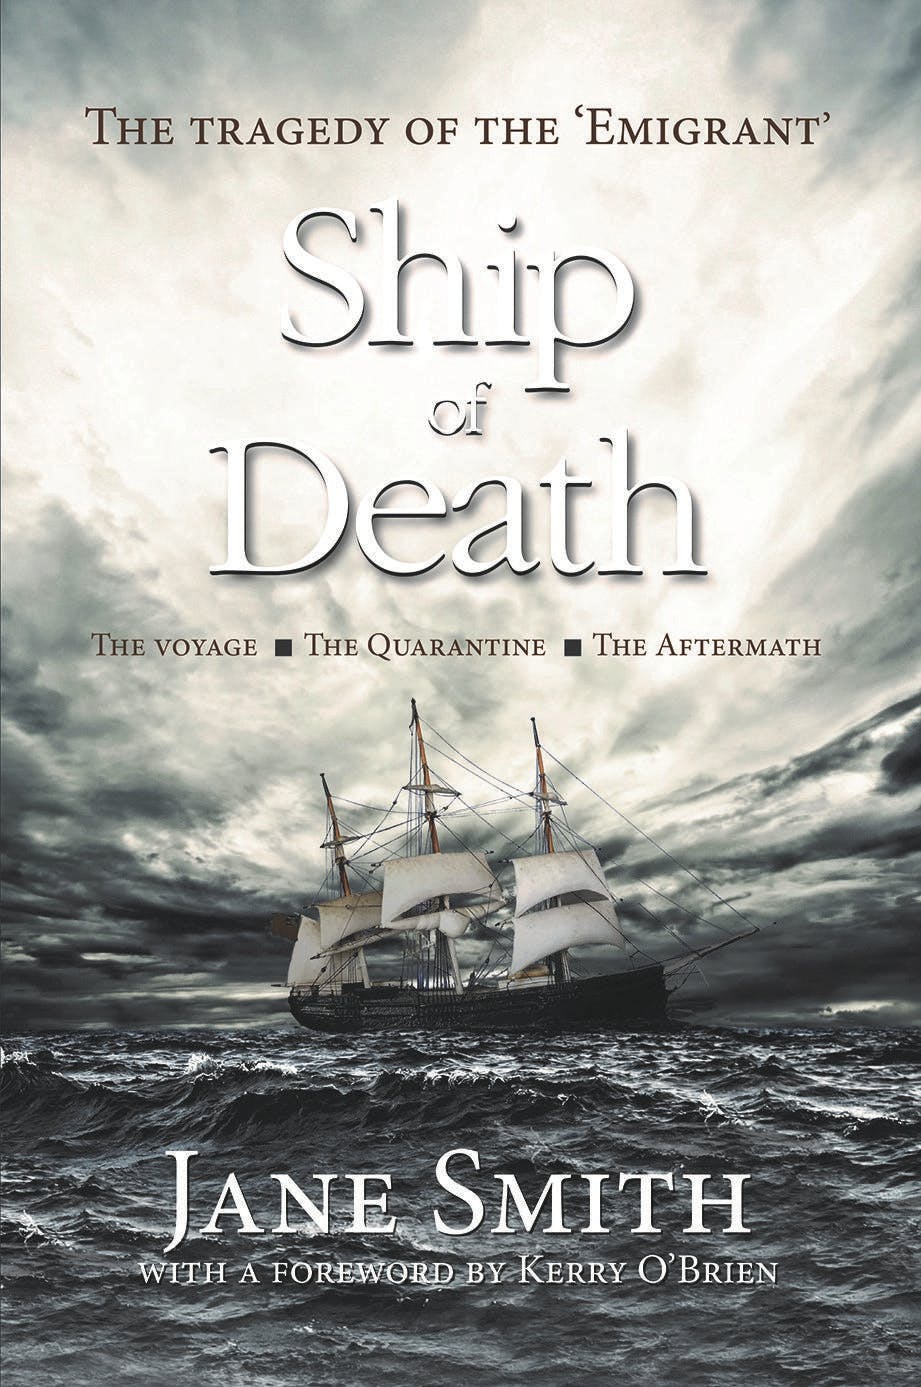 Emigrant: The Ship of Death by Jane Smith